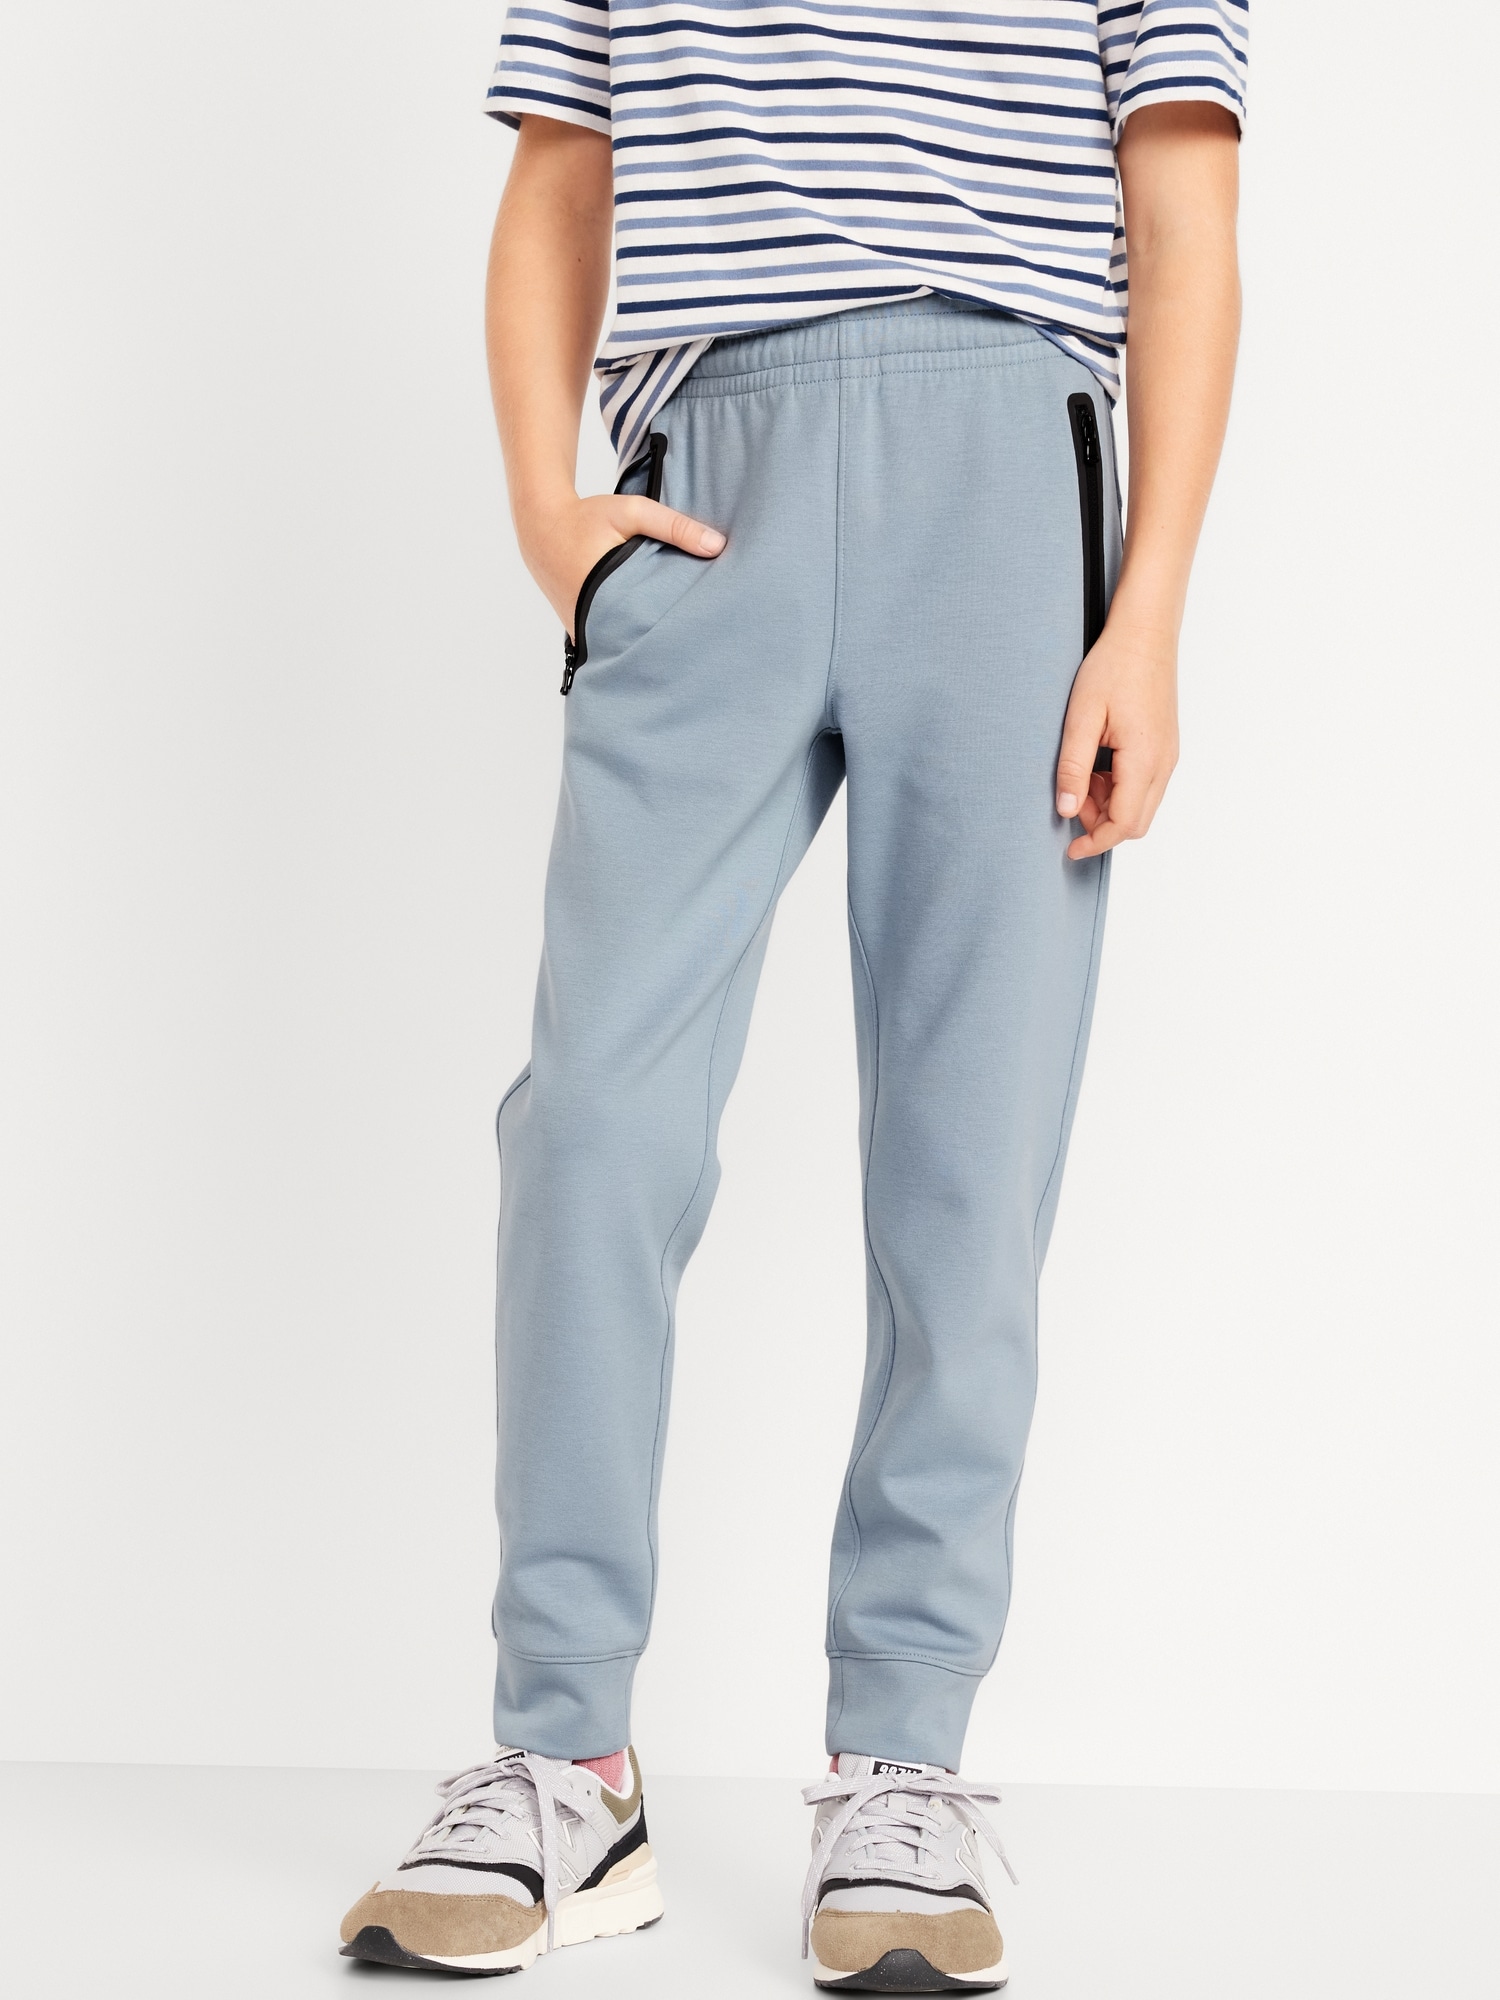 Old Navy High-Waisted Dynamic Fleece Jogger Sweatpants in Ocean Shale 4X  NWT - $40 New With Tags - From Tinnie